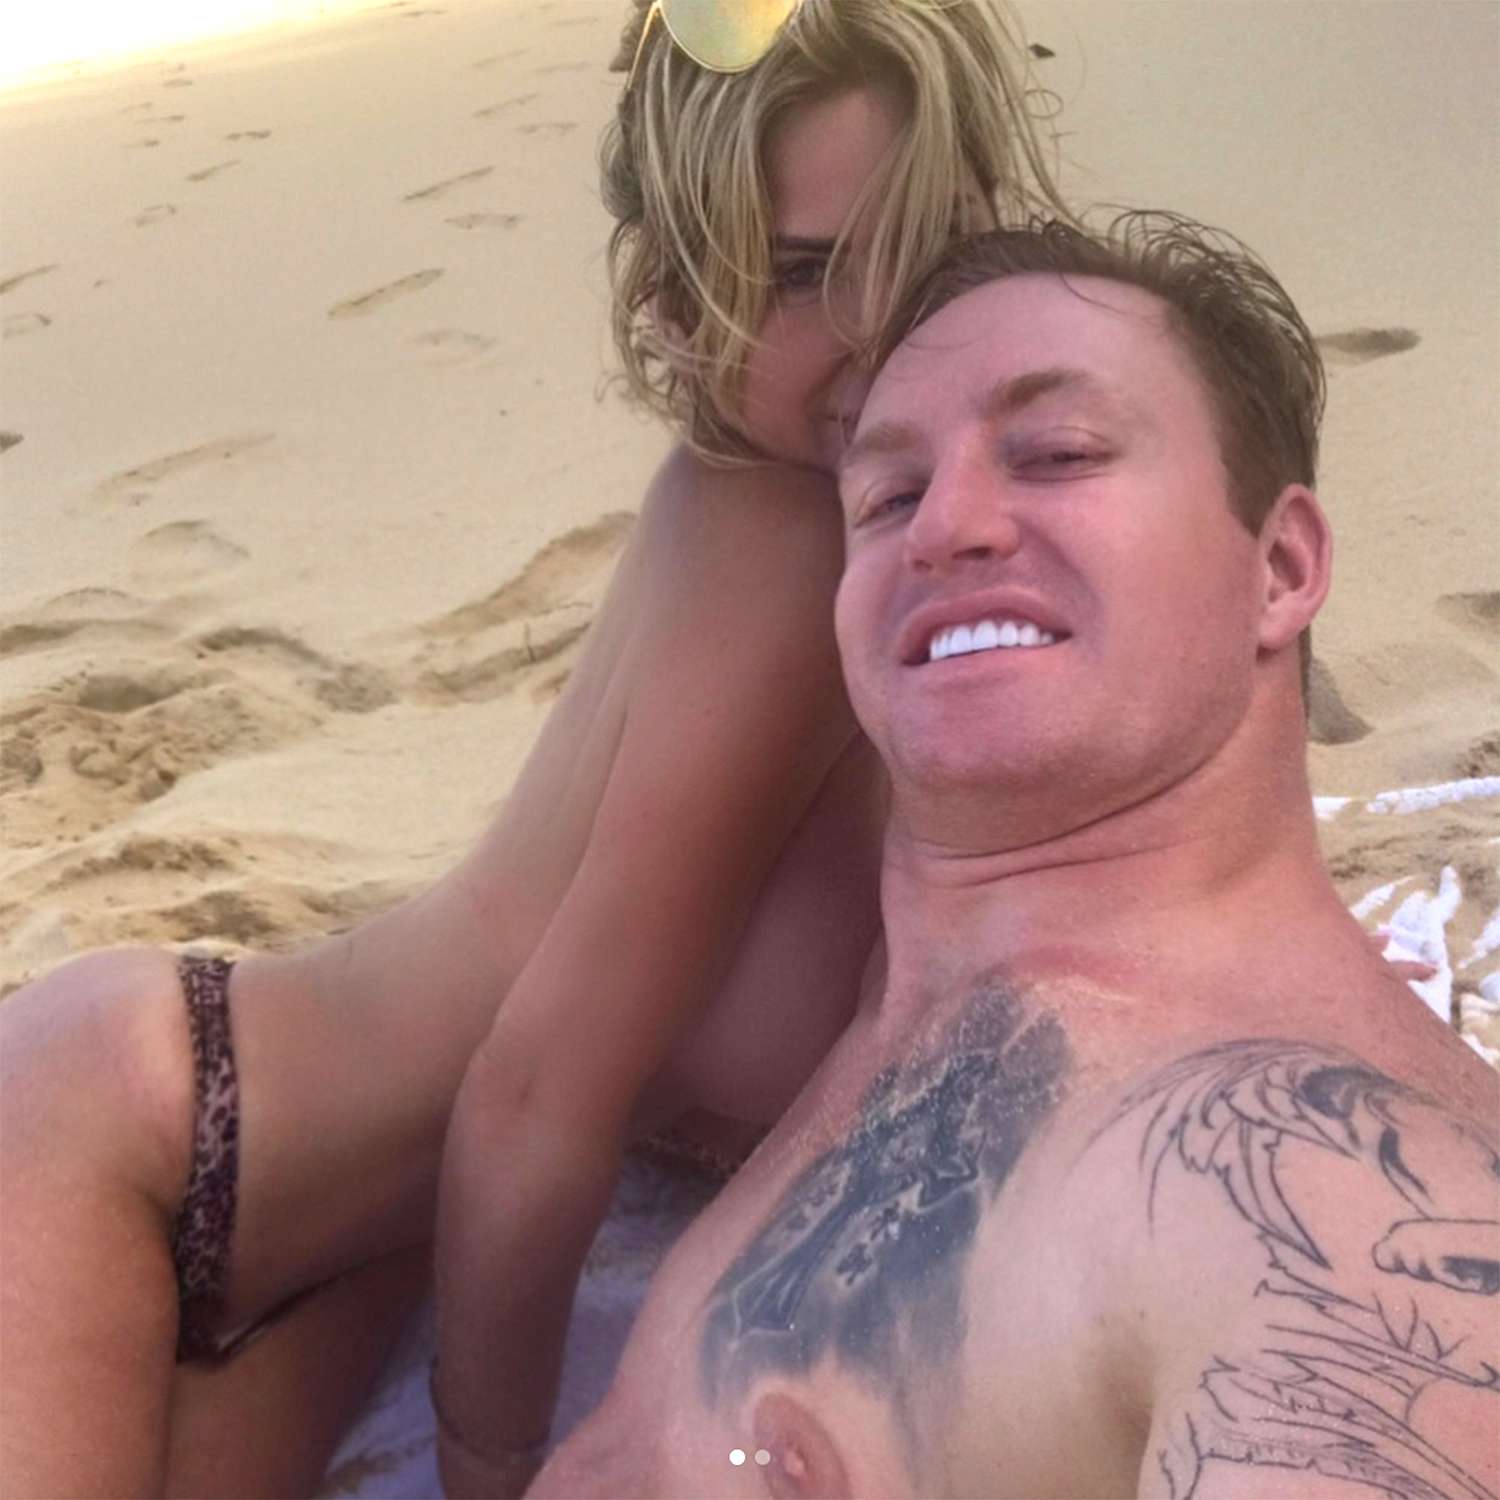 Brielle Biermann Accidentally Posts Naked Photo On Social Media